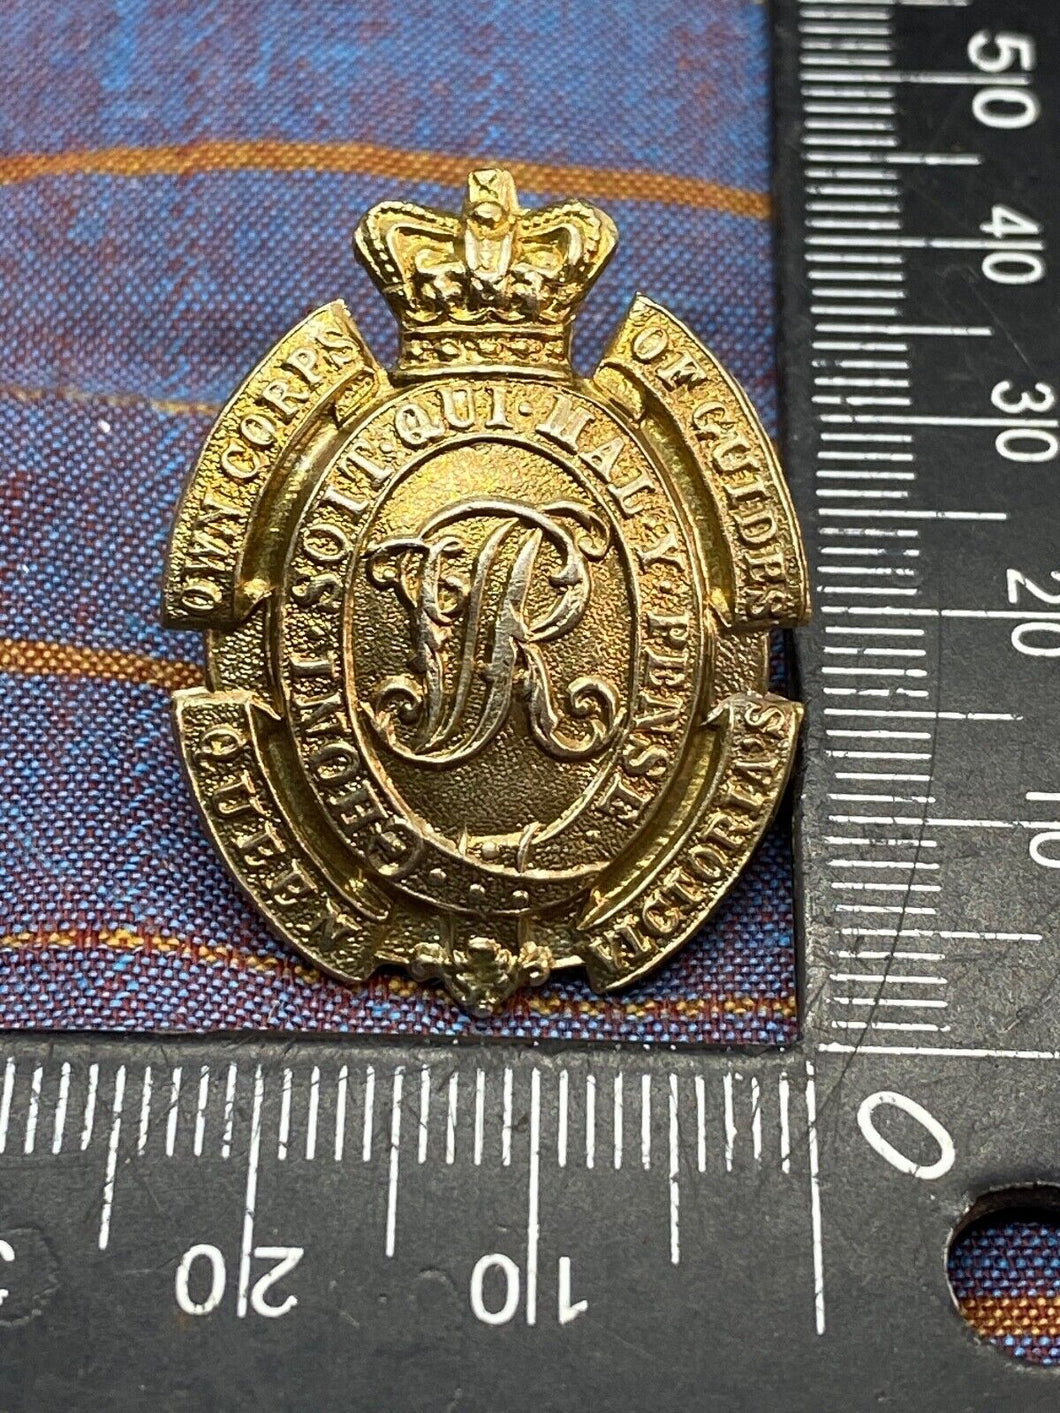 Original British Army Victorian - Queen Victoria's Own Corps of Guides Cap Badge